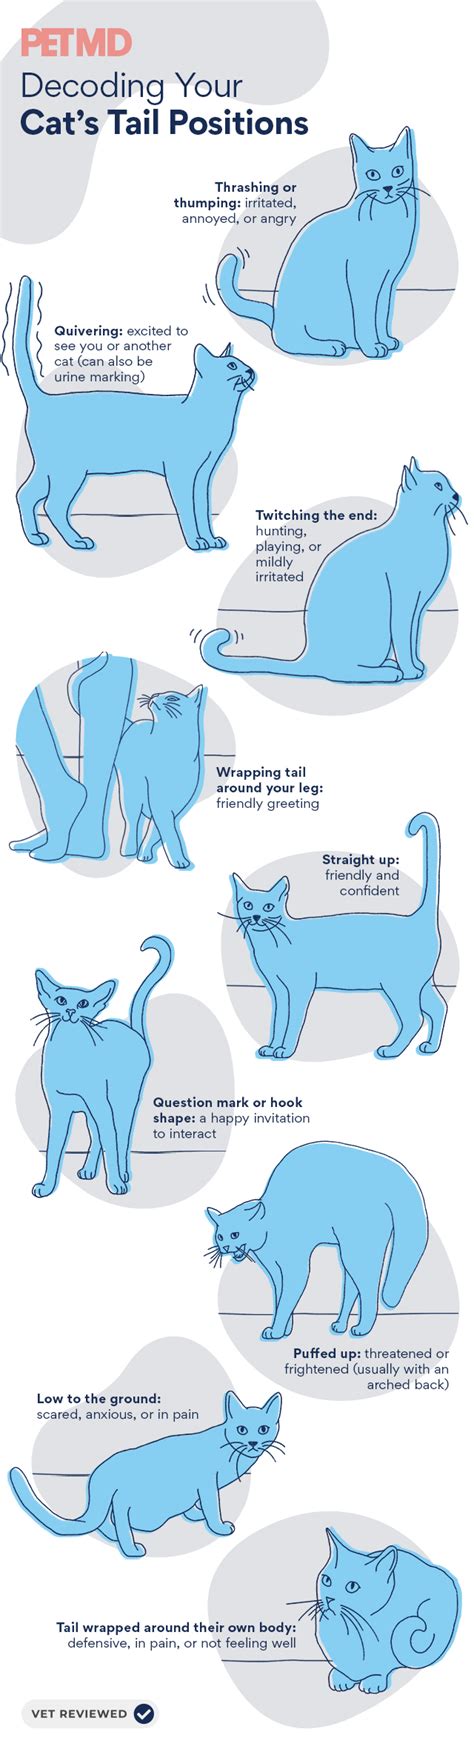 Cat Tail Language 101 Why Cats Wag Their Tails And More Petmd Cat